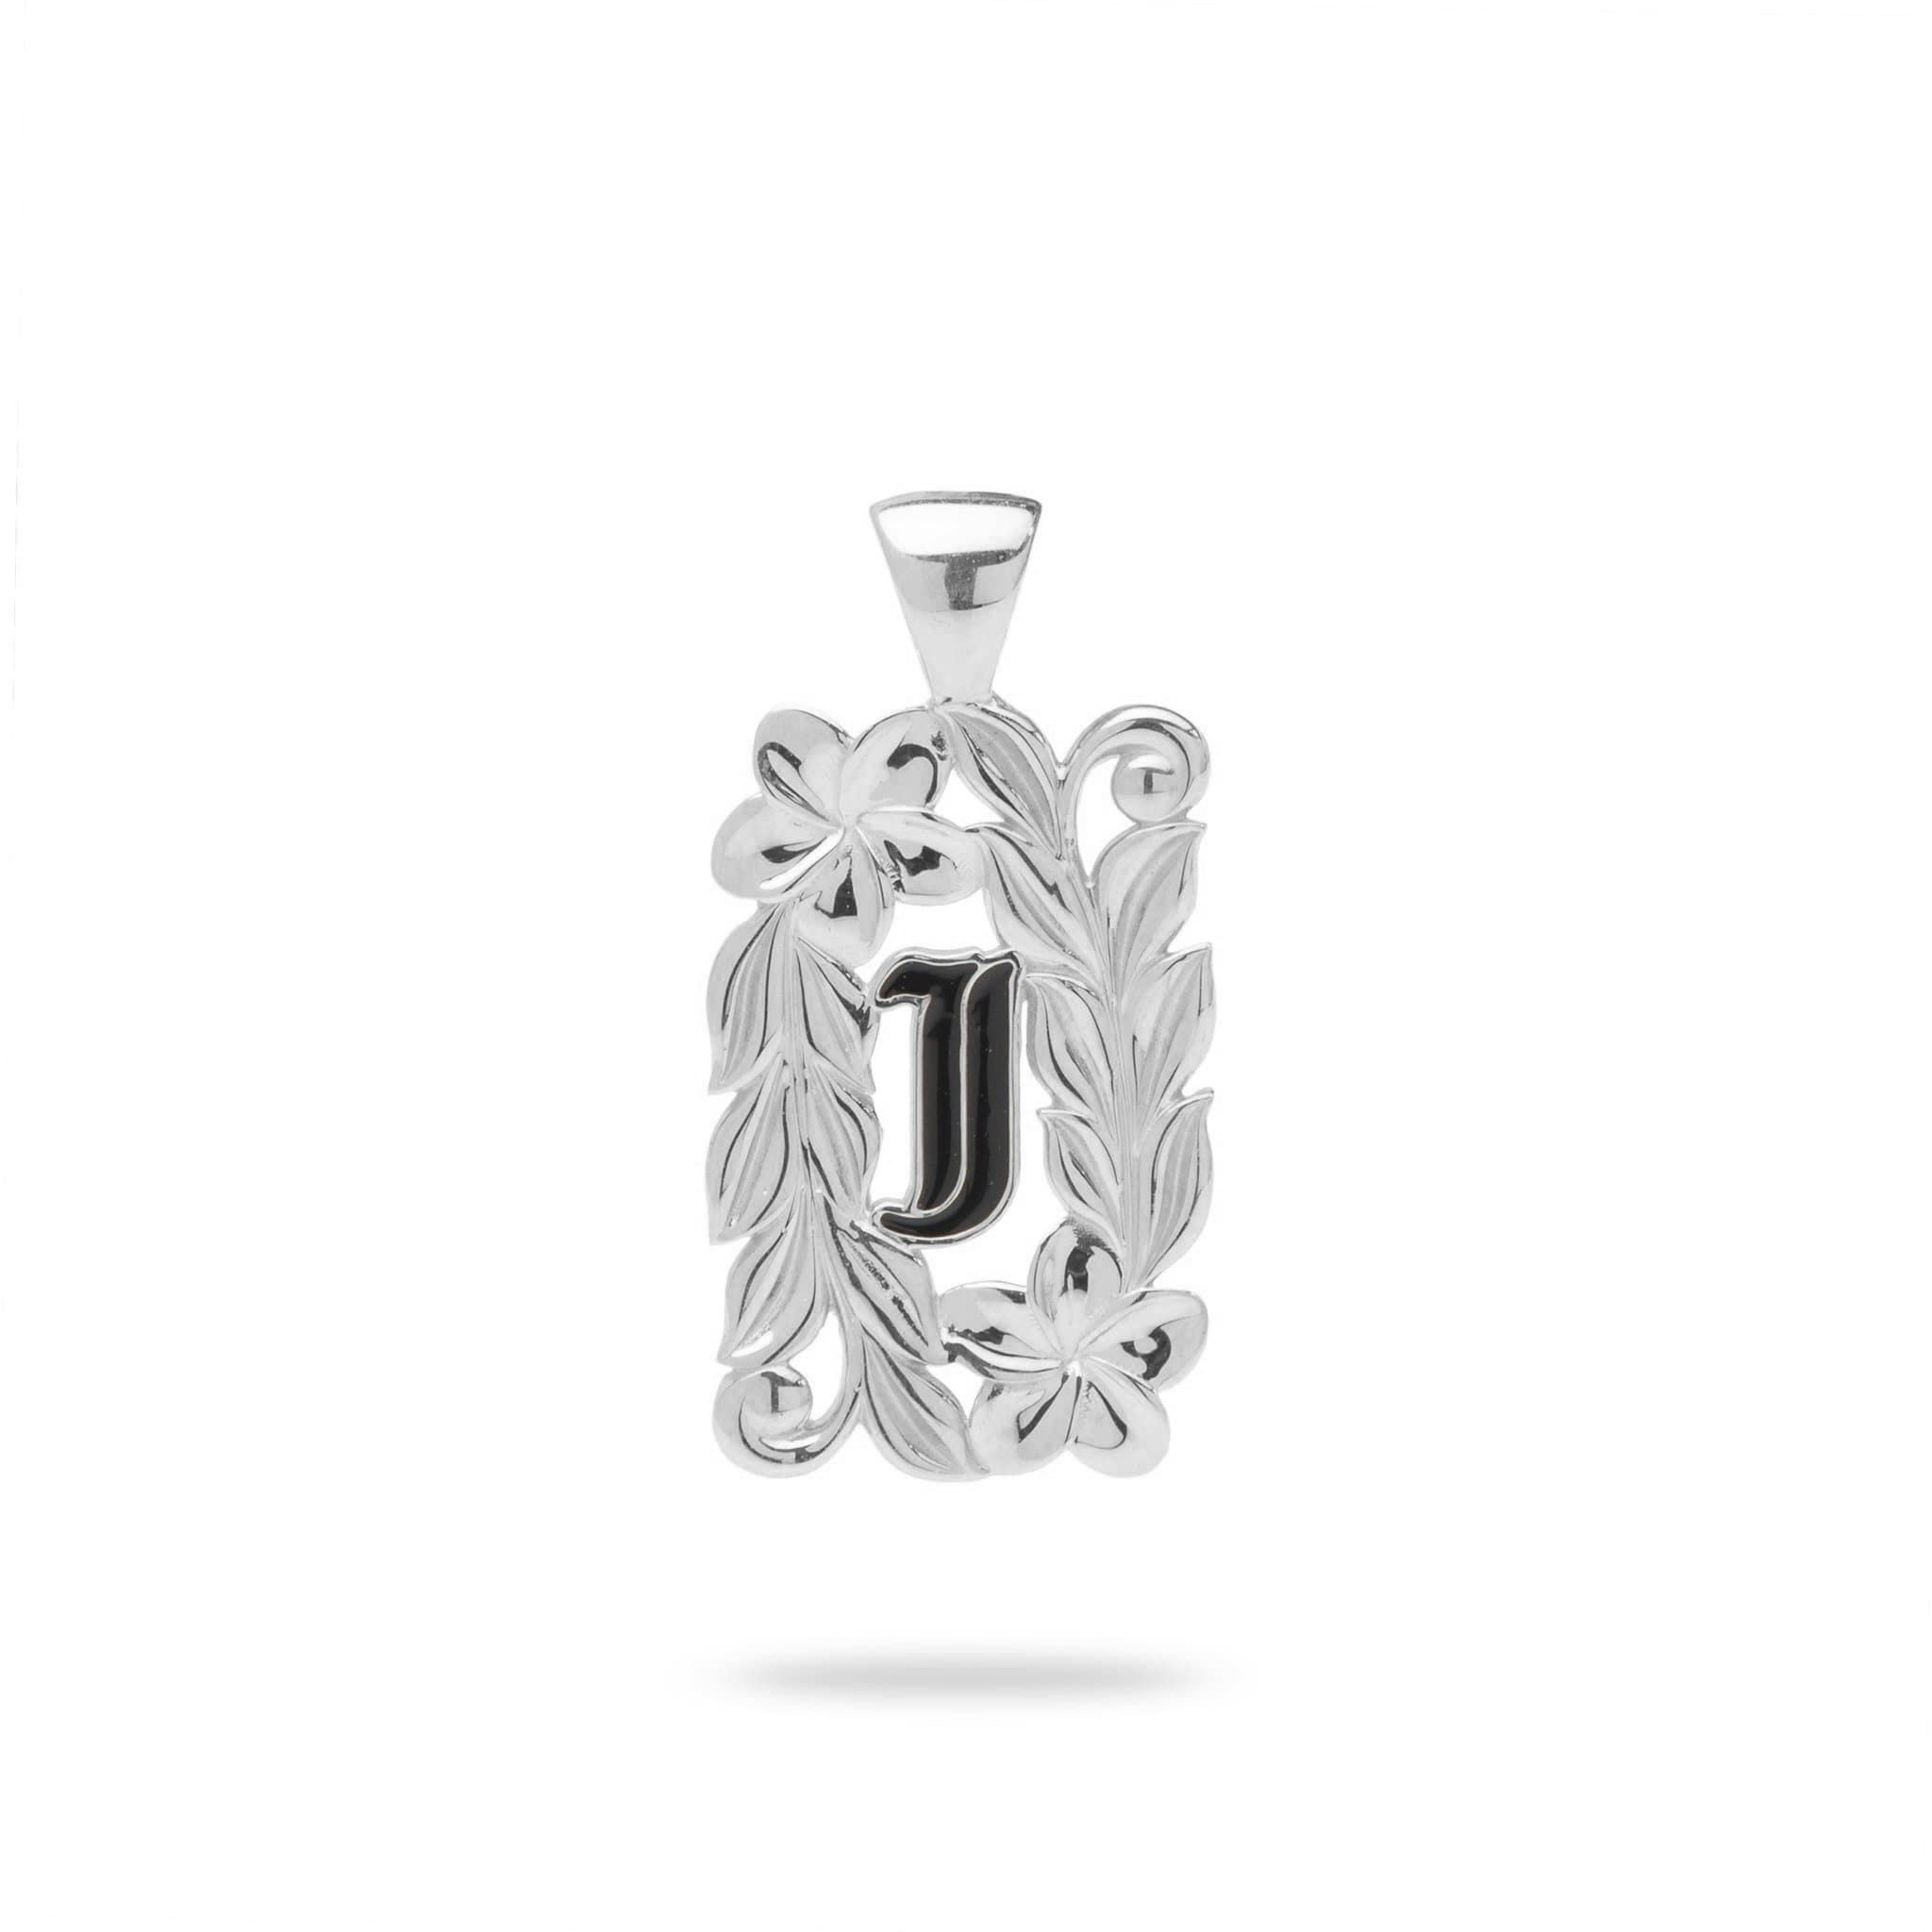 Special Order Hawaiian Heirloom Initial Pendant in White Gold - 014-03615-J-14W